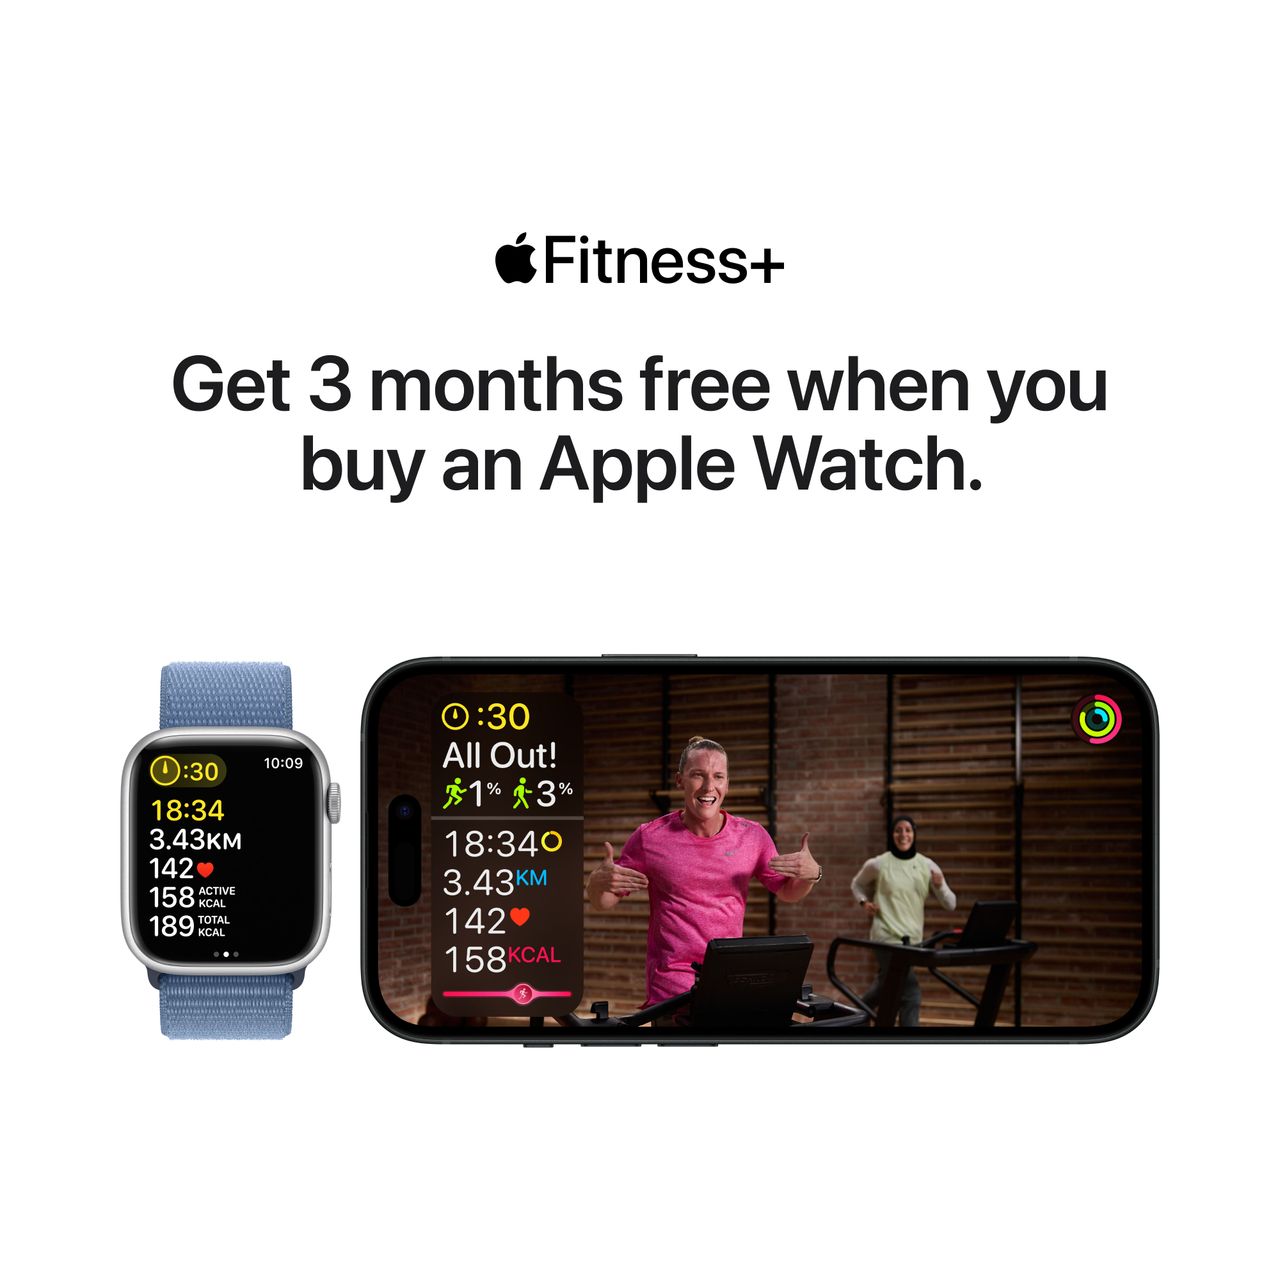 Apple Watch Series 9 release date, price, specs, and must-know features -  PhoneArena